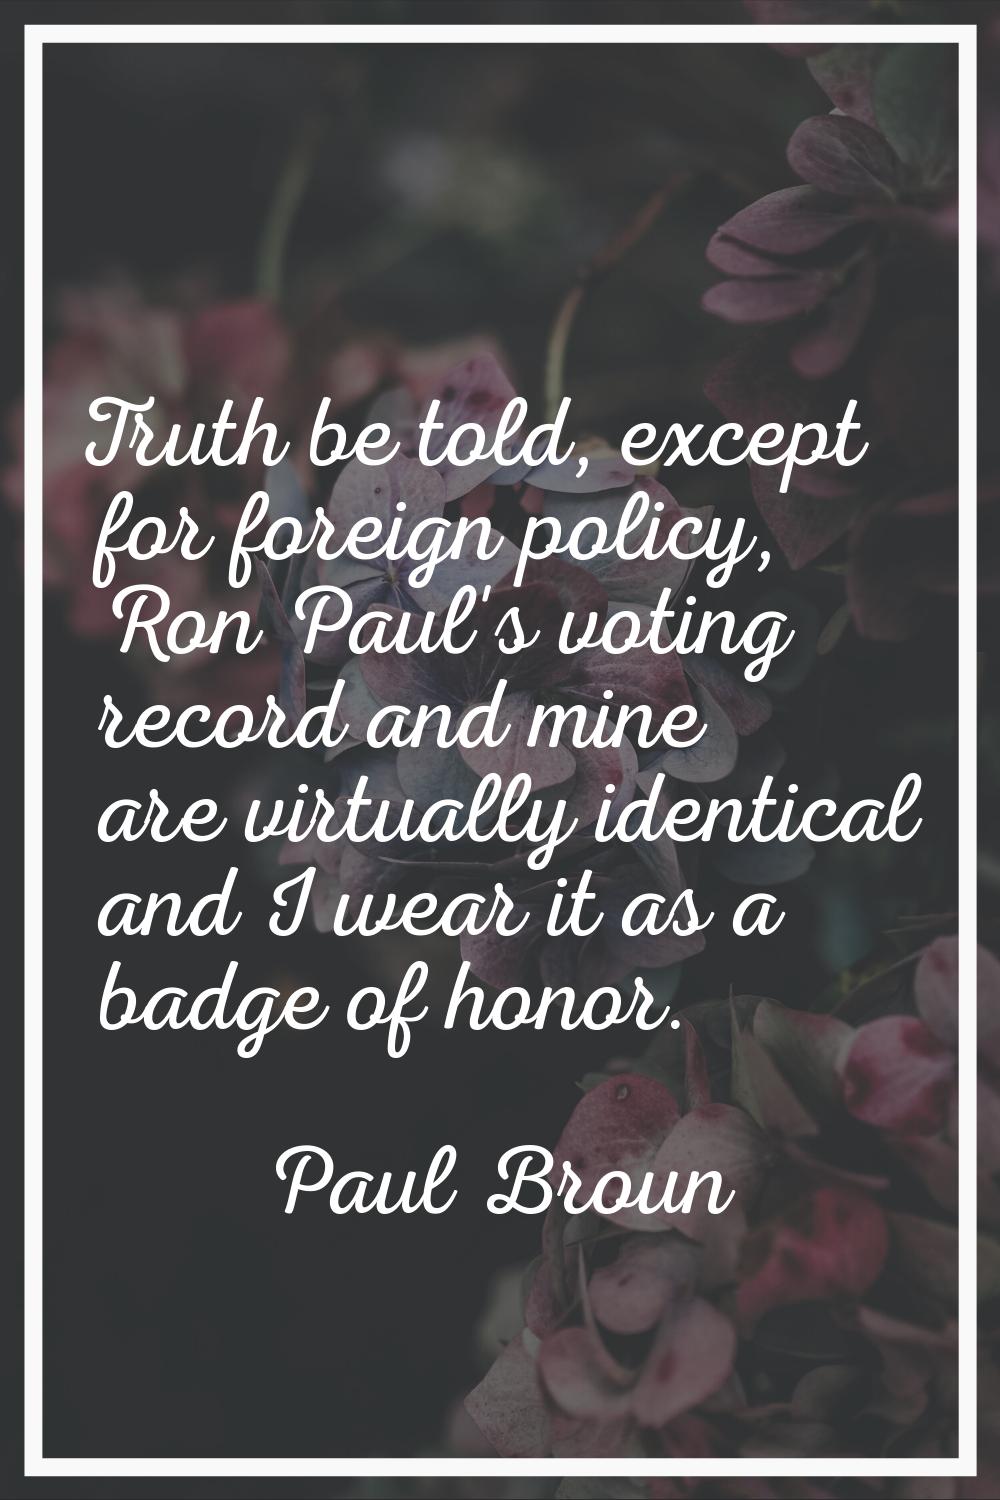 Truth be told, except for foreign policy, Ron Paul's voting record and mine are virtually identical